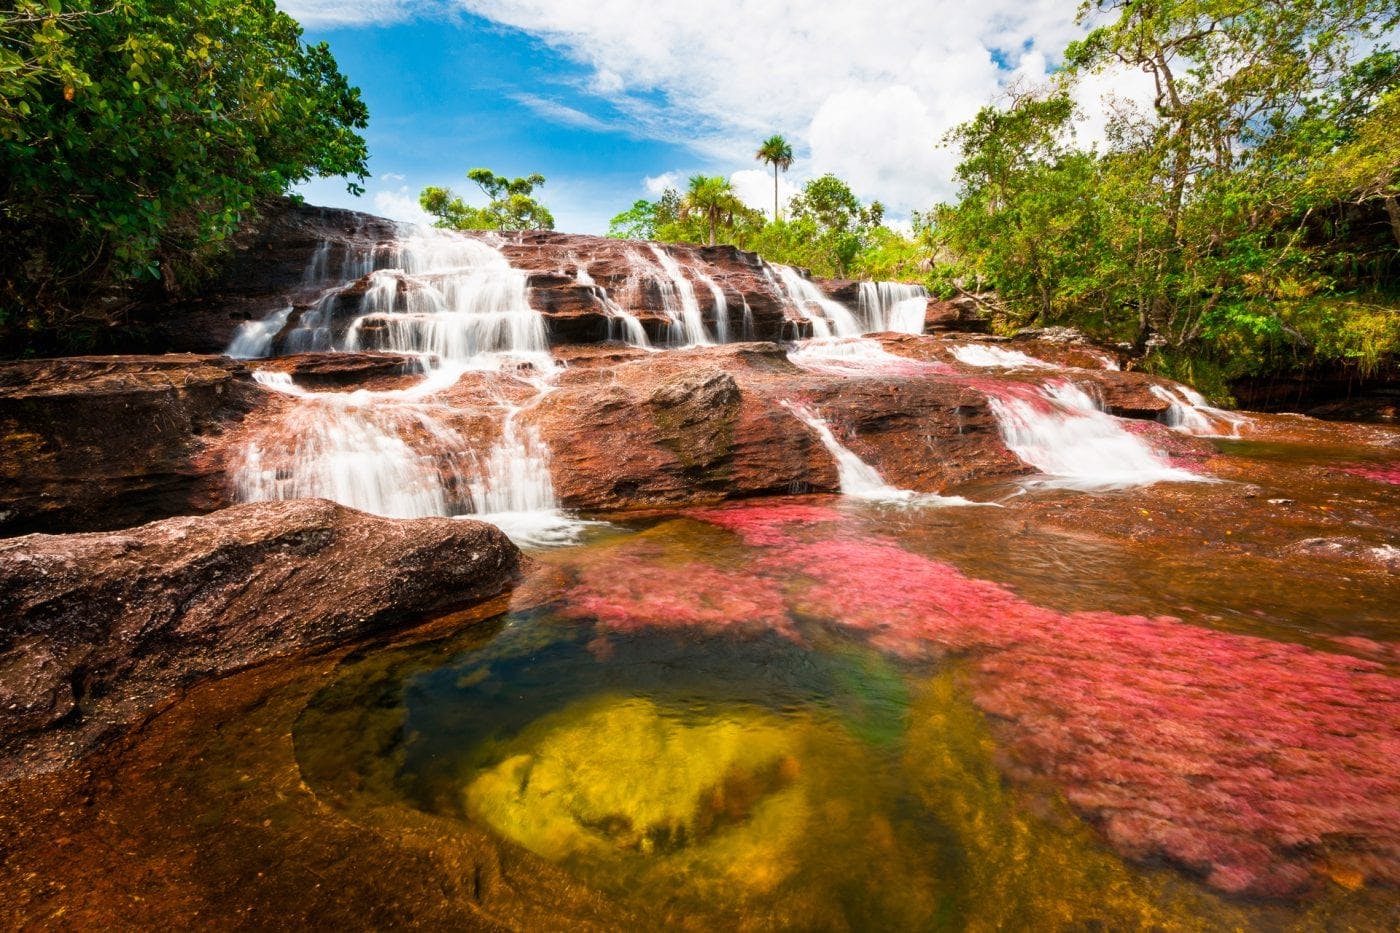 A Guide to Colombia's Caño Cristales